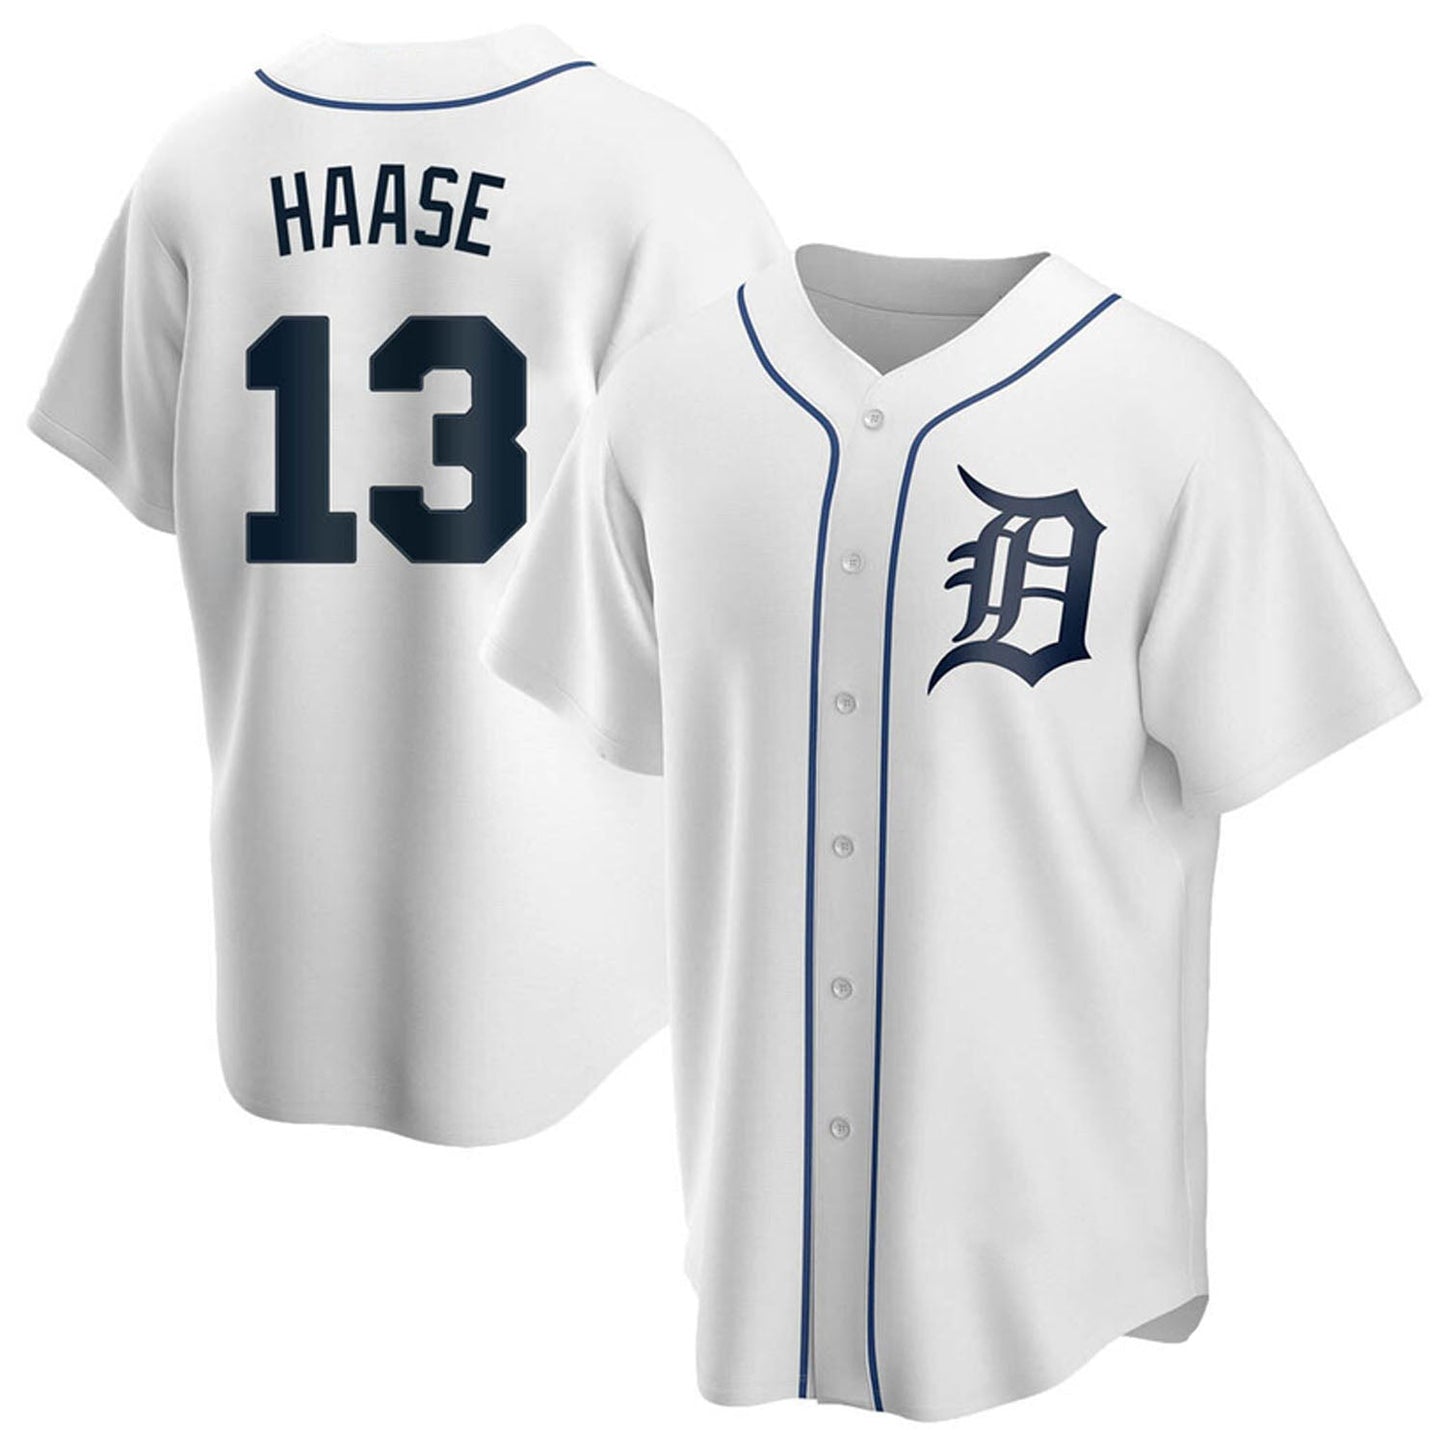 MLB Eric Haase Detroit Tigers 13 Jersey